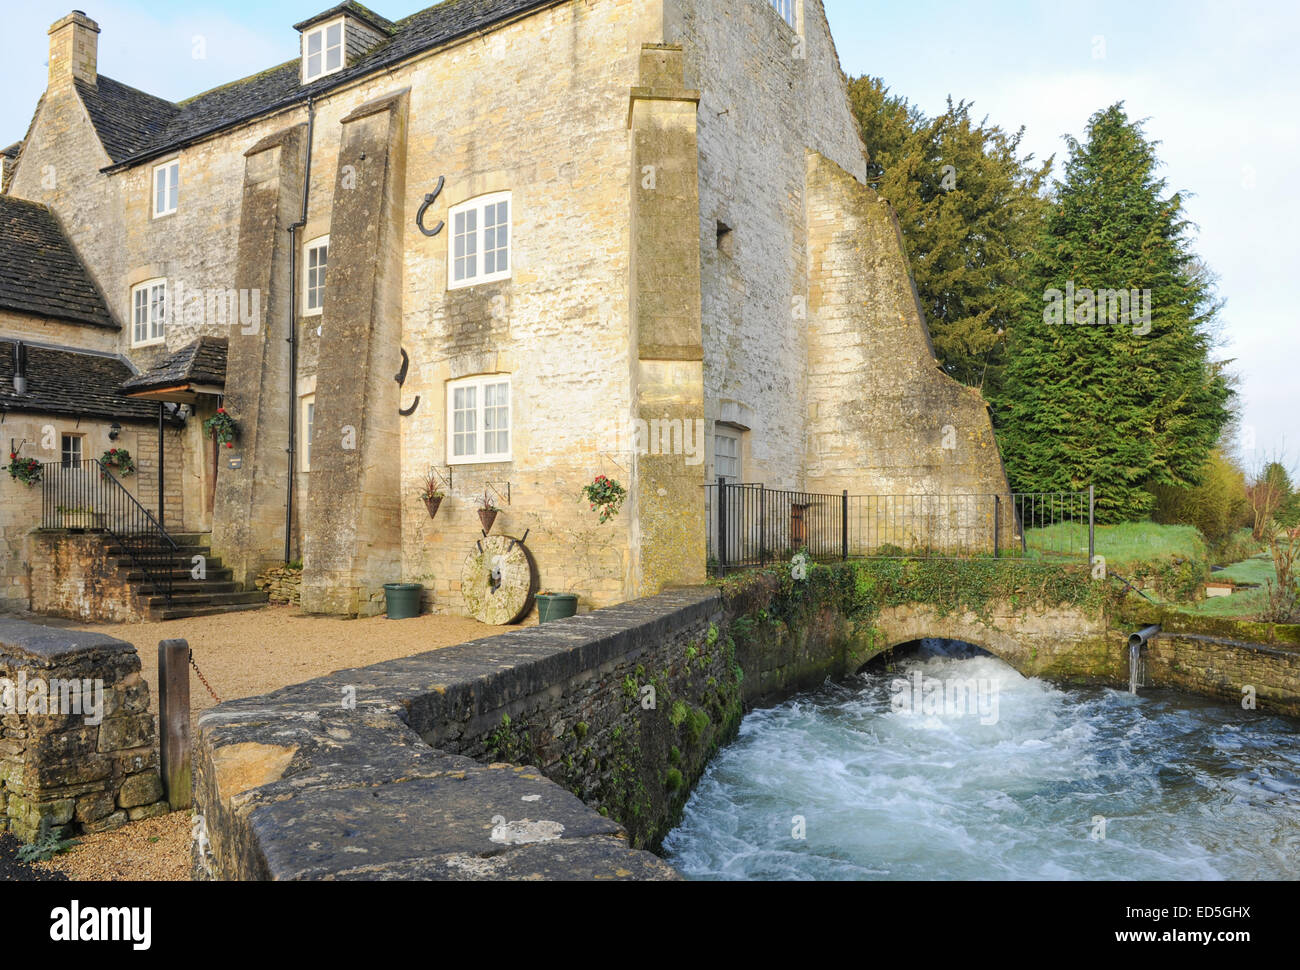 Traditional Water Mil in the Cotswold Village of Bibury, situated on the River Coln, near Cirencester, Gloucestershire, England, UK Stock Photo